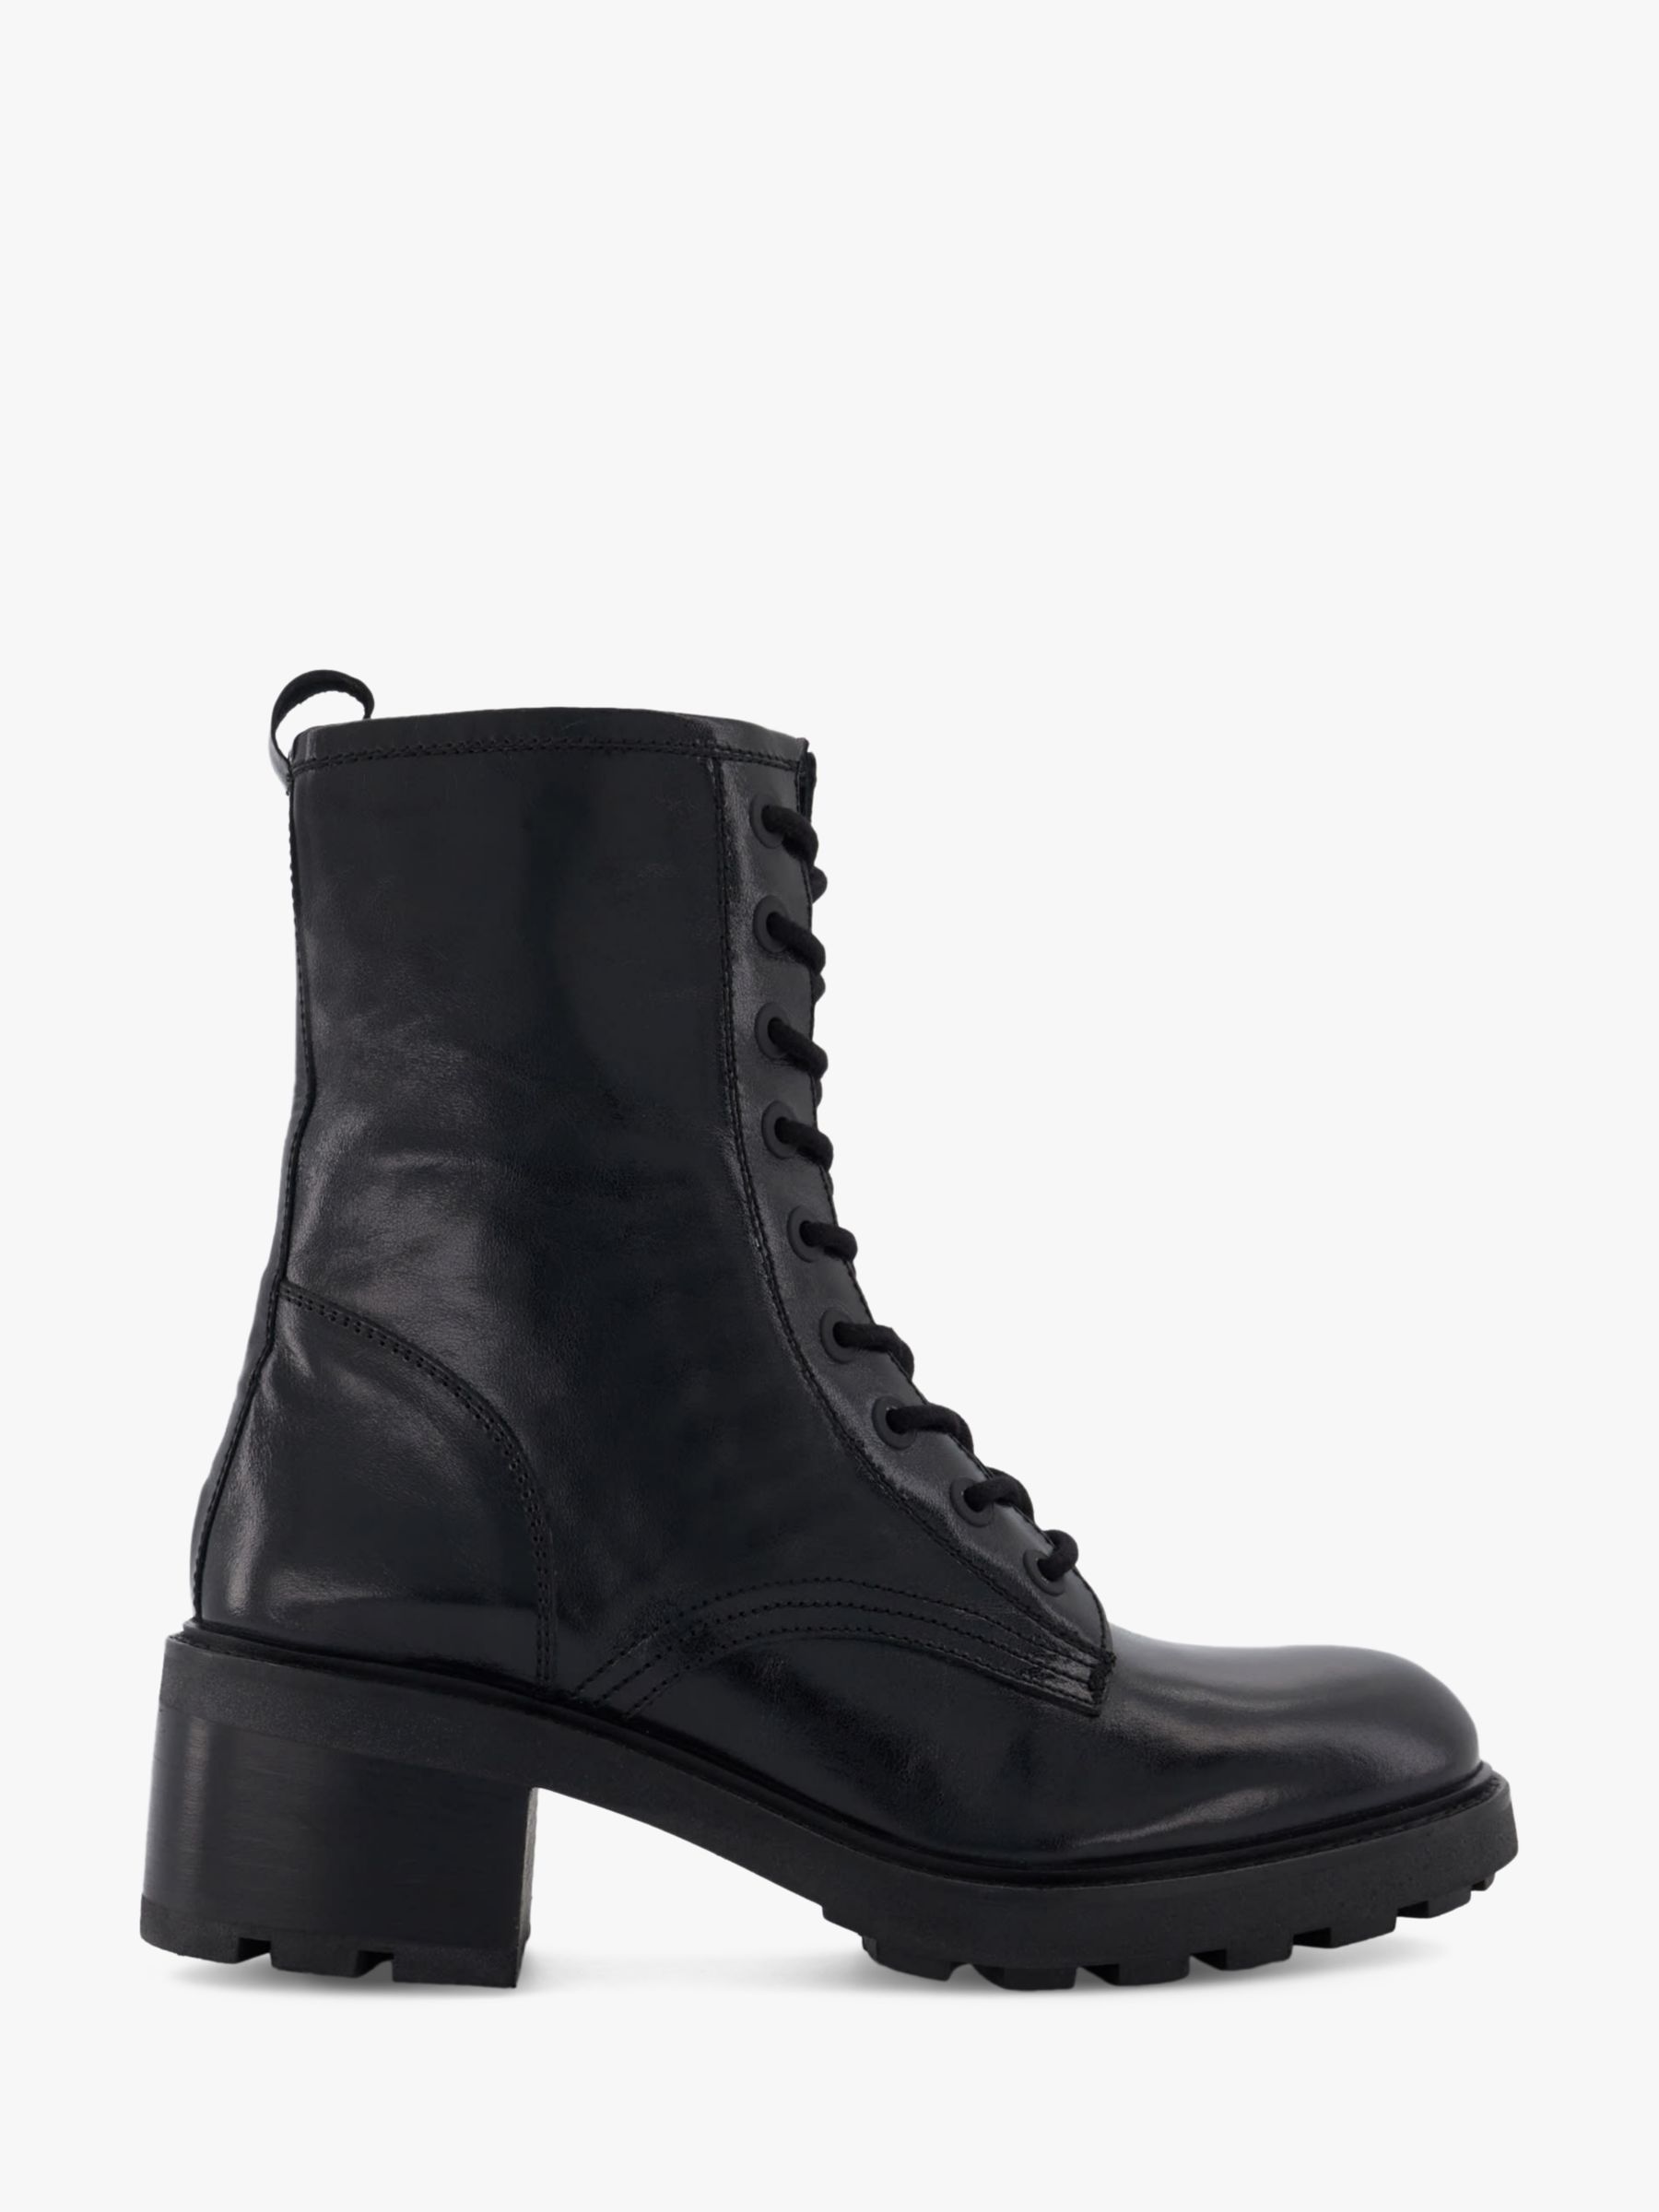 Dune Phenomenal Leather Ankle Boots, Black